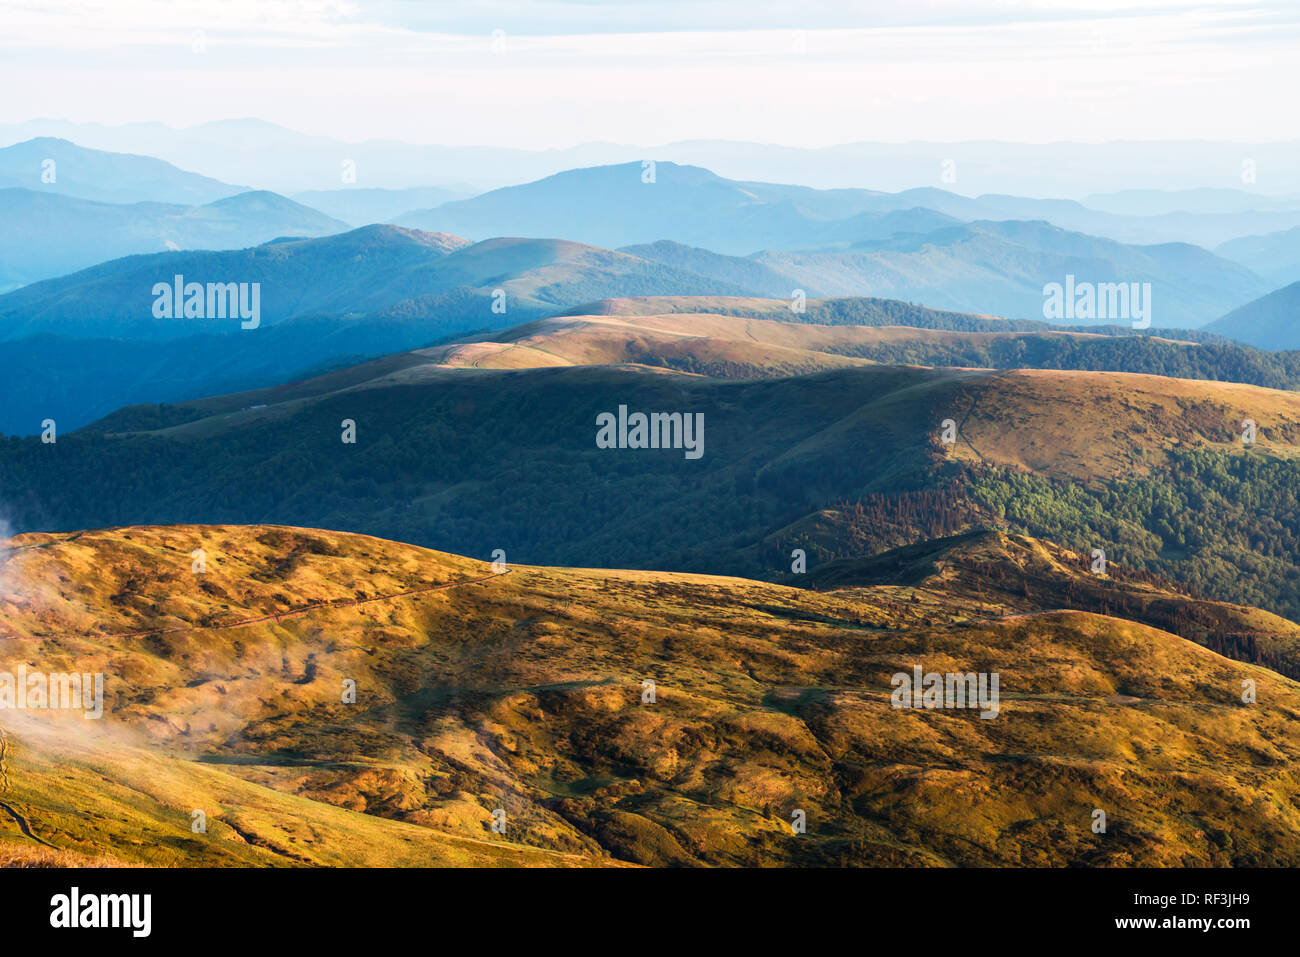 View of the stony hills glowing by evening sunlight. Dramatic spring scene. Landscape photography Stock Photo